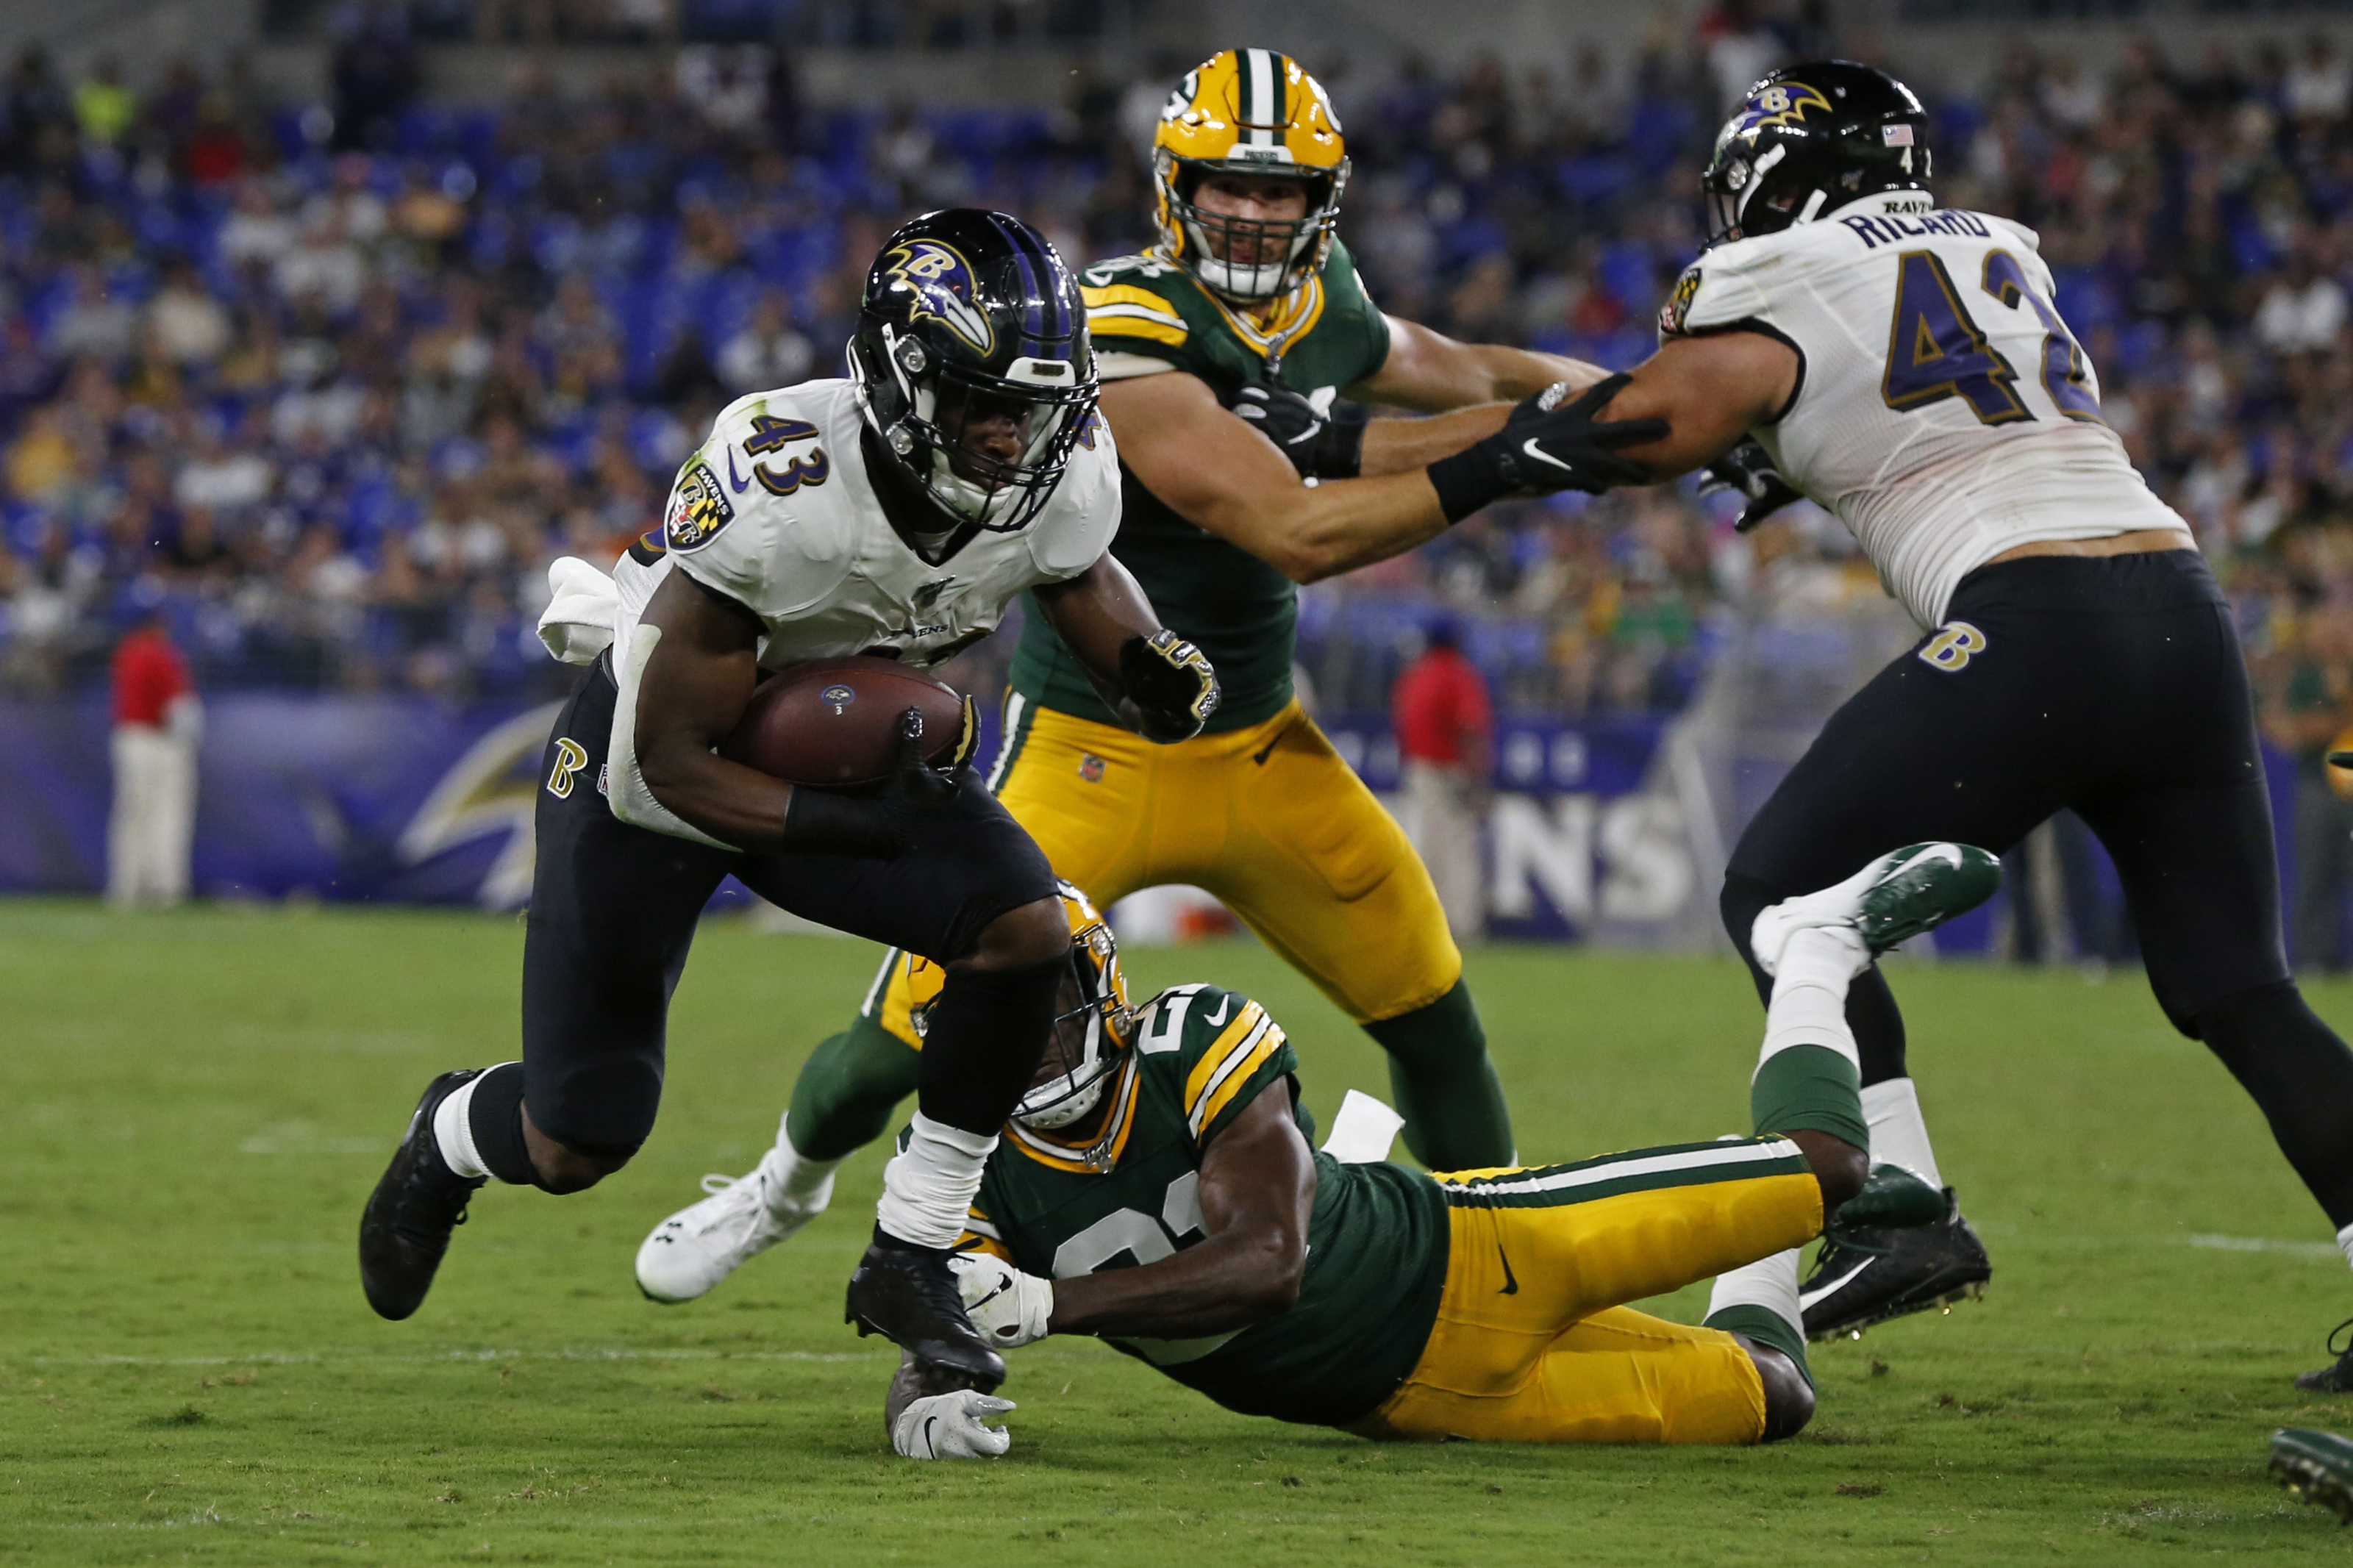 Baltimore Ravens: Justice Hill making a strong case for a large role